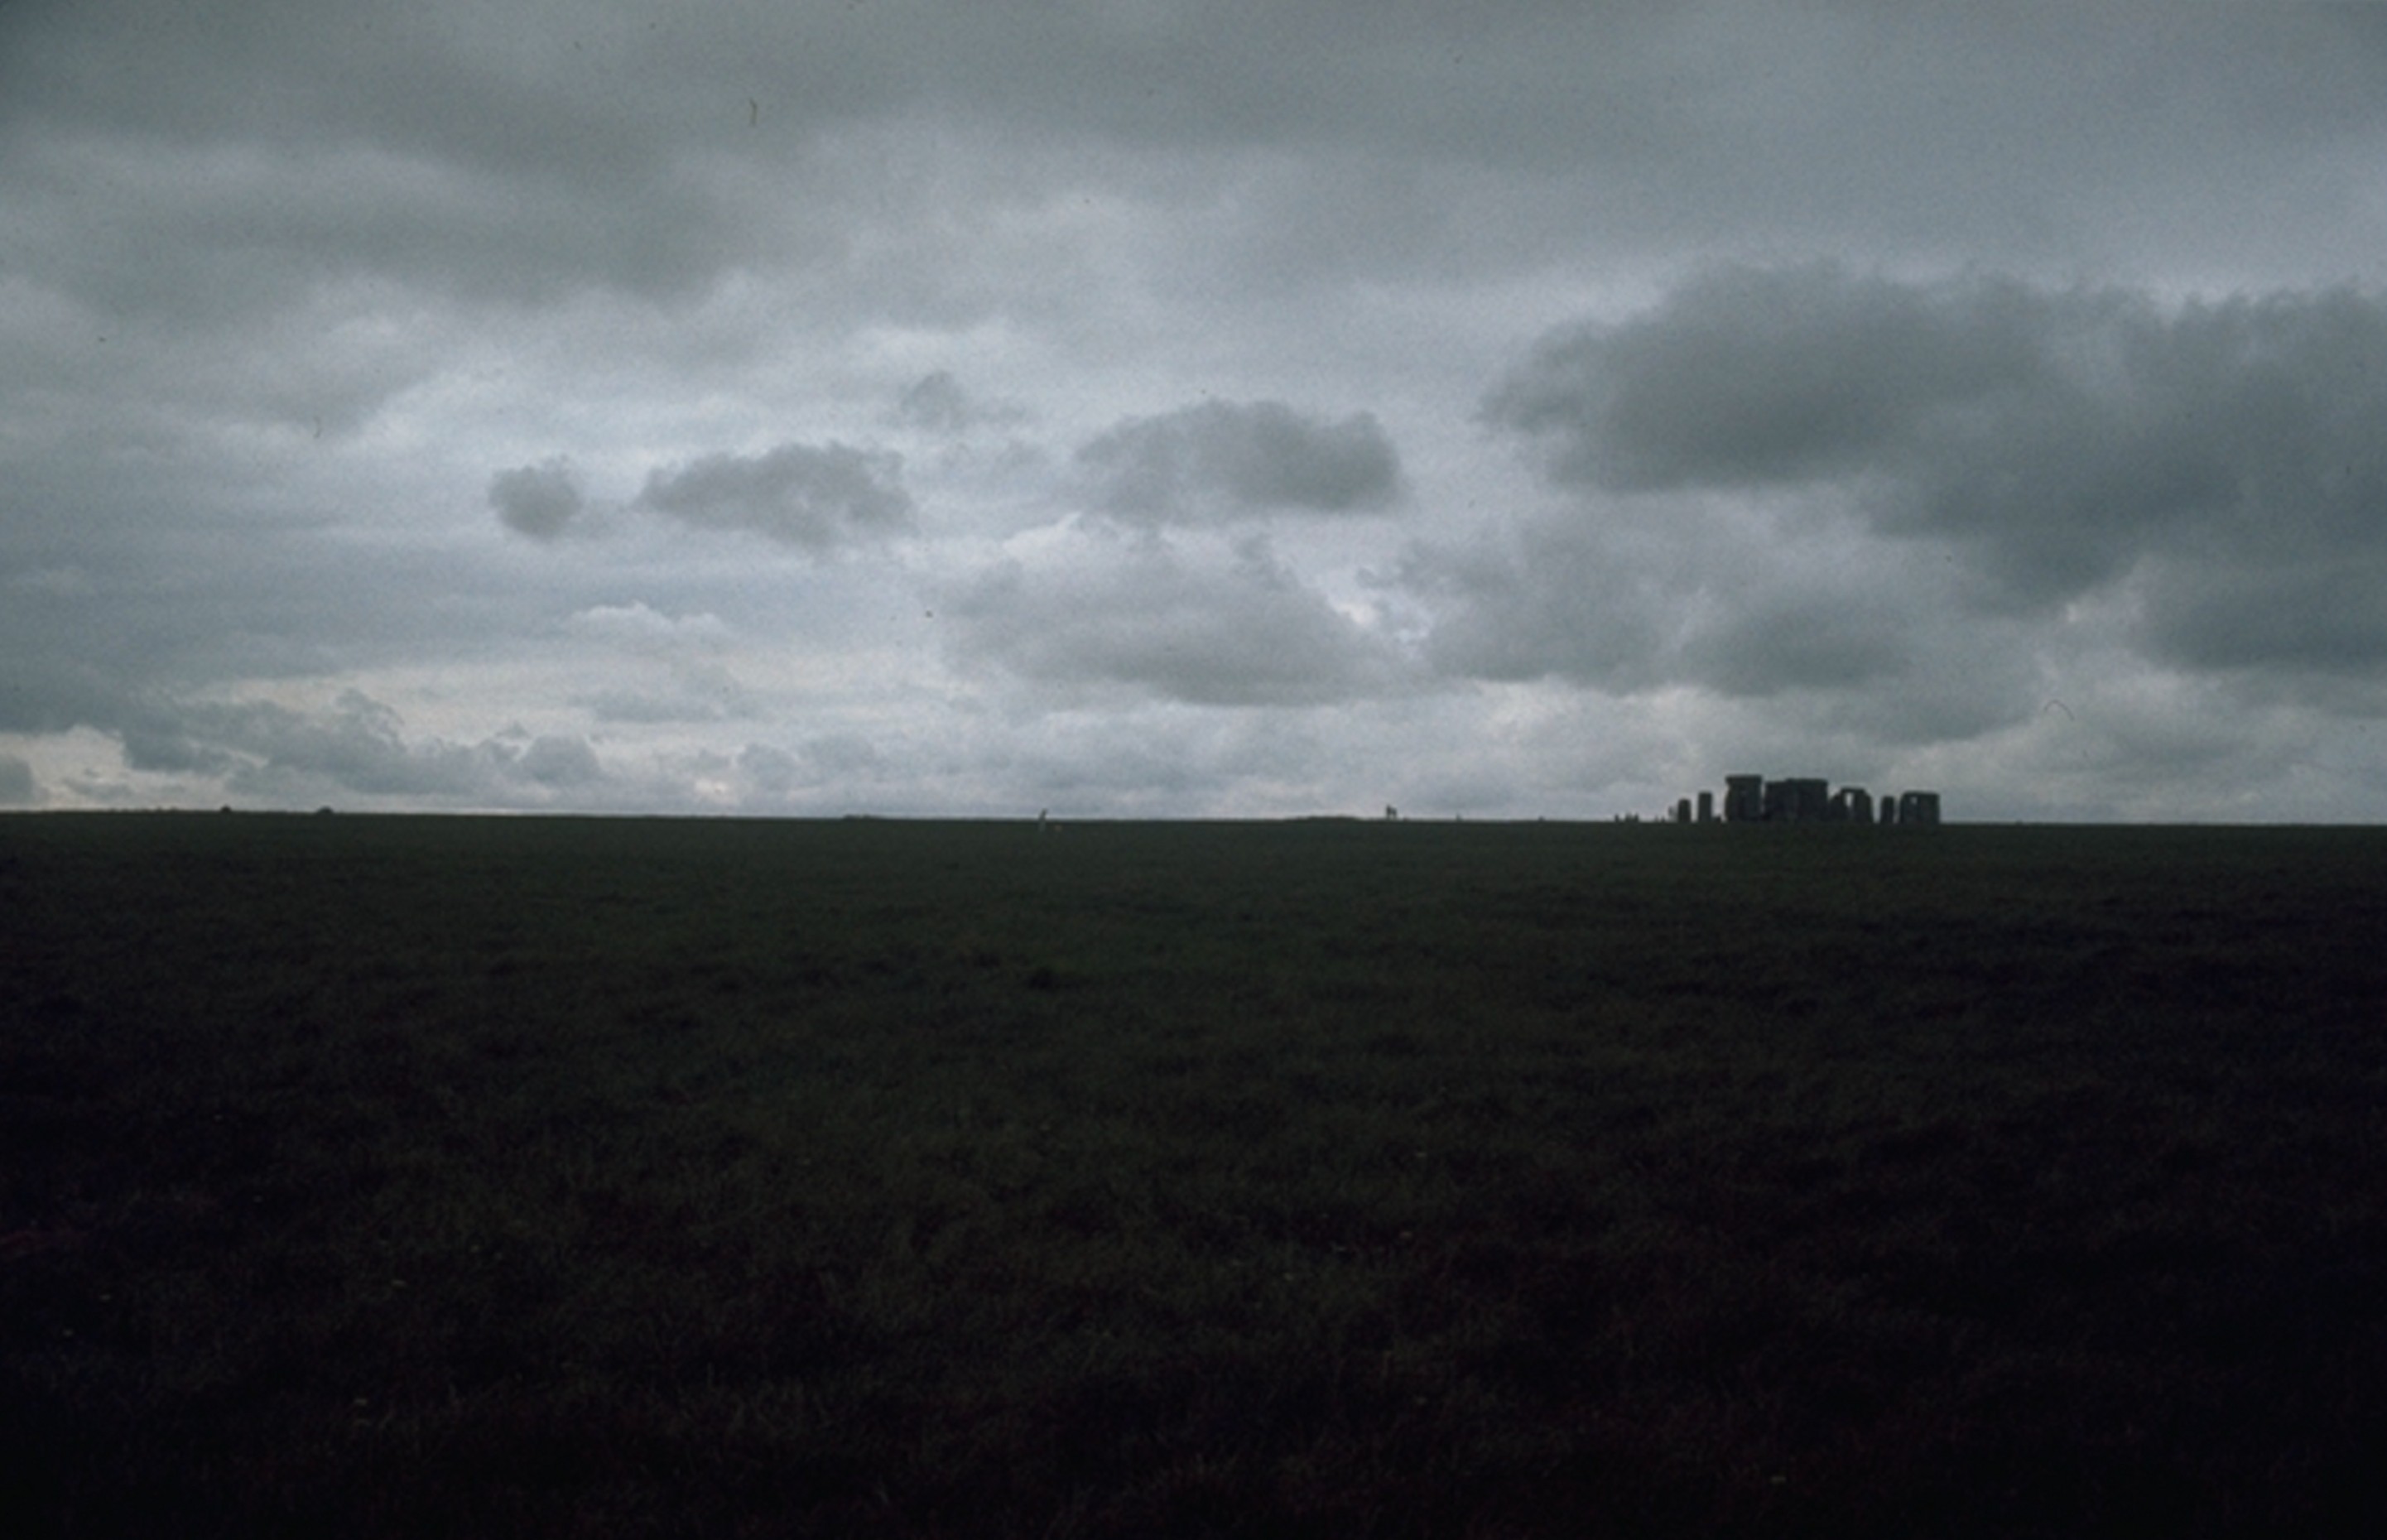 Stonehenge as I walked to it from across the field 1971